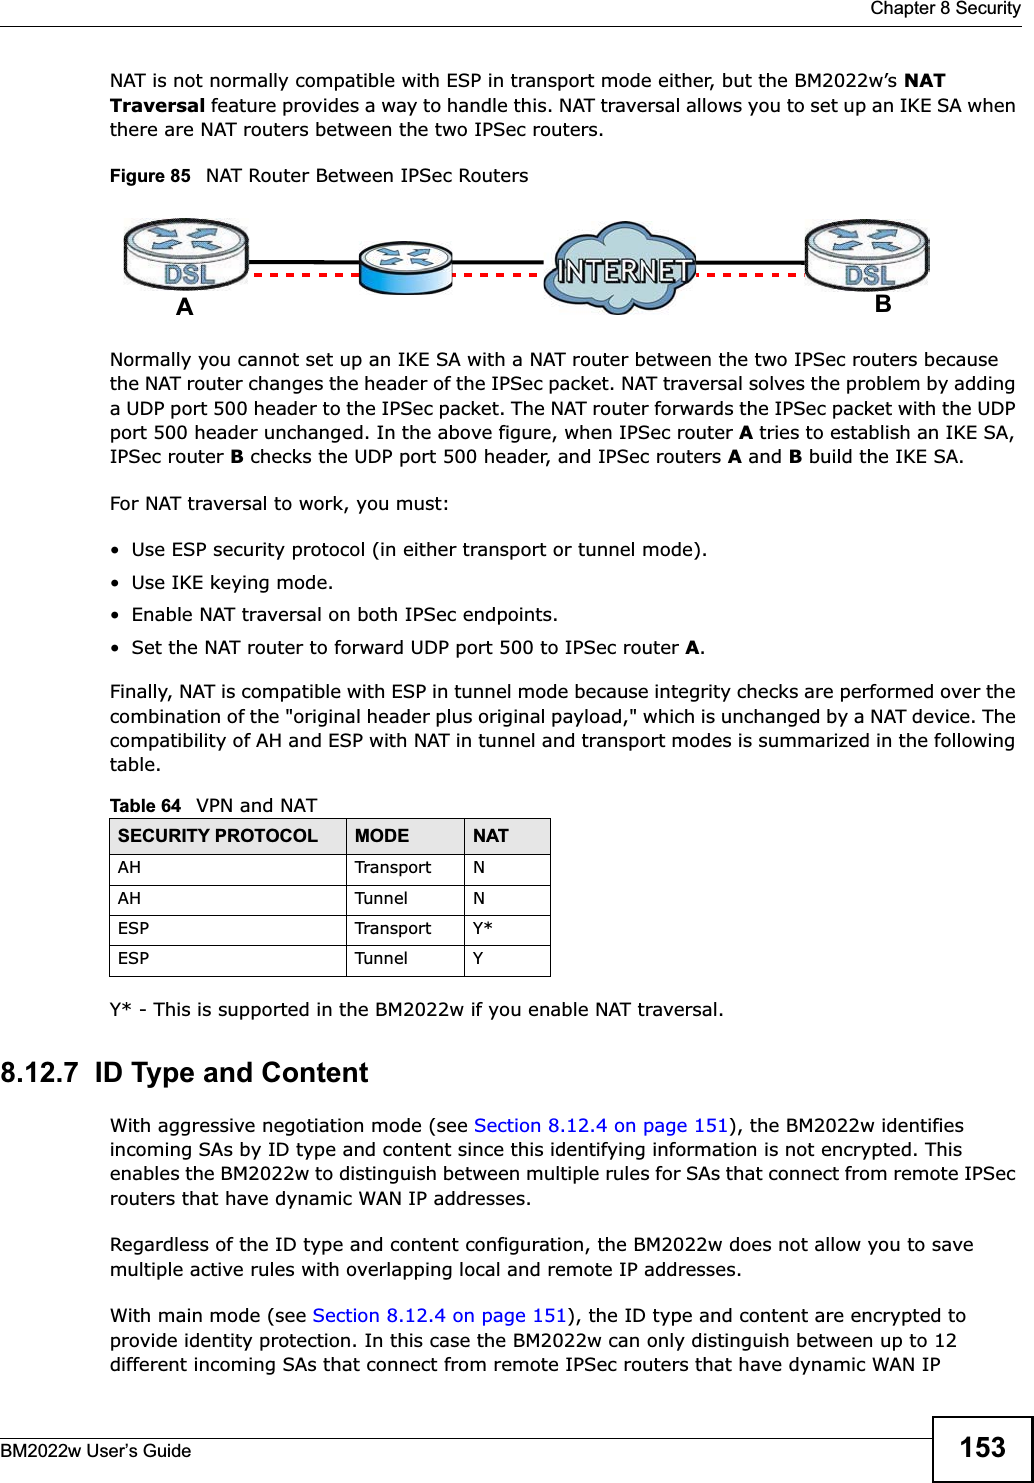  Chapter 8 SecurityBM2022w User’s Guide 153NAT is not normally compatible with ESP in transport mode either, but the BM2022w’s NATTraversal feature provides a way to handle this. NAT traversal allows you to set up an IKE SA when there are NAT routers between the two IPSec routers.Figure 85   NAT Router Between IPSec RoutersNormally you cannot set up an IKE SA with a NAT router between the two IPSec routers because the NAT router changes the header of the IPSec packet. NAT traversal solves the problem by adding a UDP port 500 header to the IPSec packet. The NAT router forwards the IPSec packet with the UDP port 500 header unchanged. In the above figure, when IPSec router A tries to establish an IKE SA, IPSec router B checks the UDP port 500 header, and IPSec routers A and B build the IKE SA.For NAT traversal to work, you must:• Use ESP security protocol (in either transport or tunnel mode).•Use IKE keying mode.• Enable NAT traversal on both IPSec endpoints.• Set the NAT router to forward UDP port 500 to IPSec router A.Finally, NAT is compatible with ESP in tunnel mode because integrity checks are performed over the combination of the &quot;original header plus original payload,&quot; which is unchanged by a NAT device. The compatibility of AH and ESP with NAT in tunnel and transport modes is summarized in the following table.Y* - This is supported in the BM2022w if you enable NAT traversal.8.12.7  ID Type and ContentWith aggressive negotiation mode (see Section 8.12.4 on page 151), the BM2022w identifies incoming SAs by ID type and content since this identifying information is not encrypted. This enables the BM2022w to distinguish between multiple rules for SAs that connect from remote IPSec routers that have dynamic WAN IP addresses.Regardless of the ID type and content configuration, the BM2022w does not allow you to save multiple active rules with overlapping local and remote IP addresses.With main mode (see Section 8.12.4 on page 151), the ID type and content are encrypted to provide identity protection. In this case the BM2022w can only distinguish between up to 12 different incoming SAs that connect from remote IPSec routers that have dynamic WAN IP Table 64   VPN and NATSECURITY PROTOCOL MODE NATAH Transport NAH Tunnel NESP Transport Y*ESP Tunnel YAB